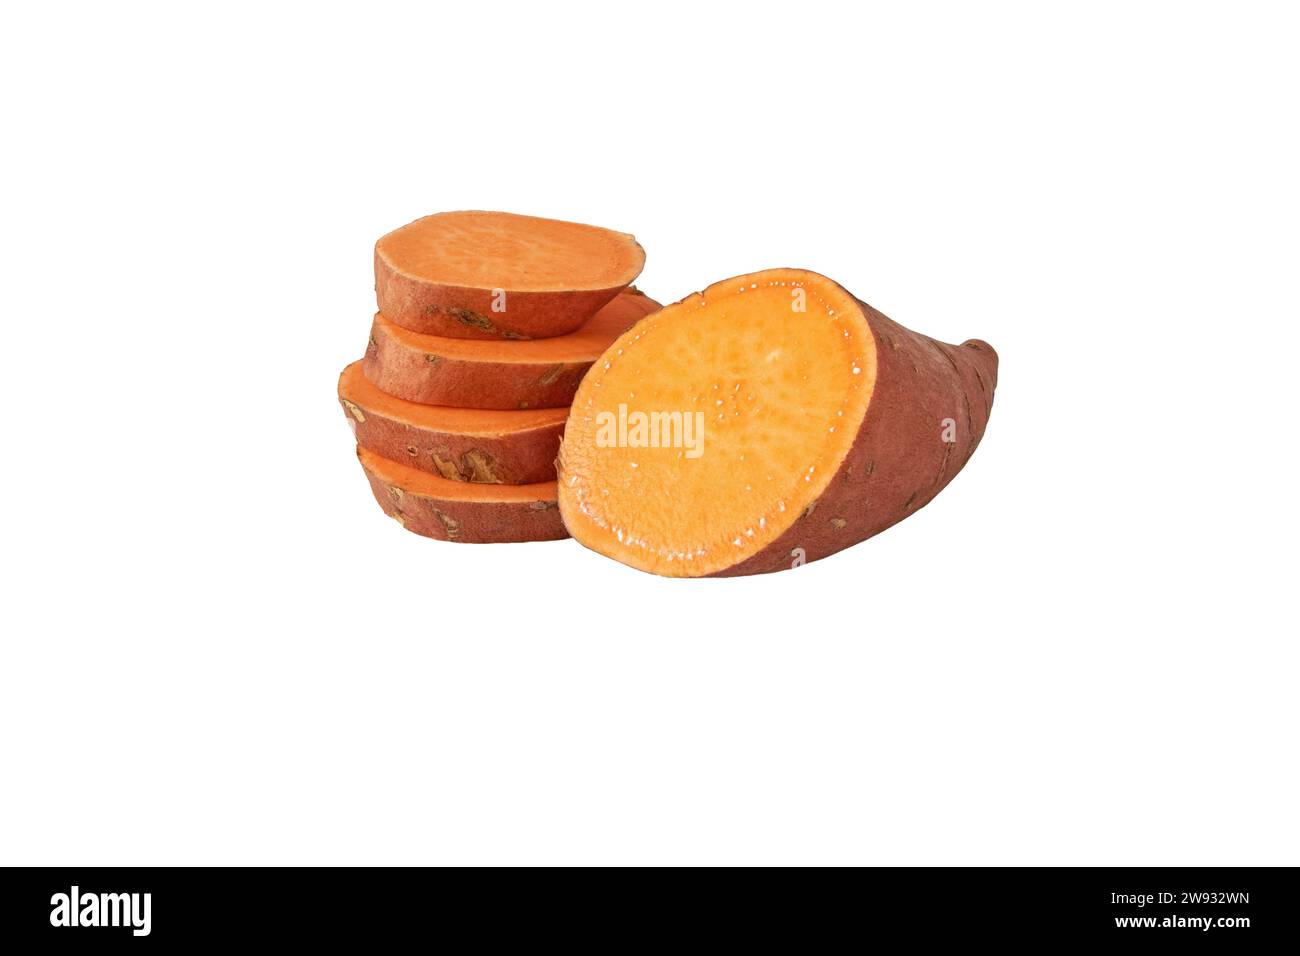 Boniato or sweet potato sliced tube with red skin and yellow flesh isolated on white. Vegetable food staple. Stock Photo